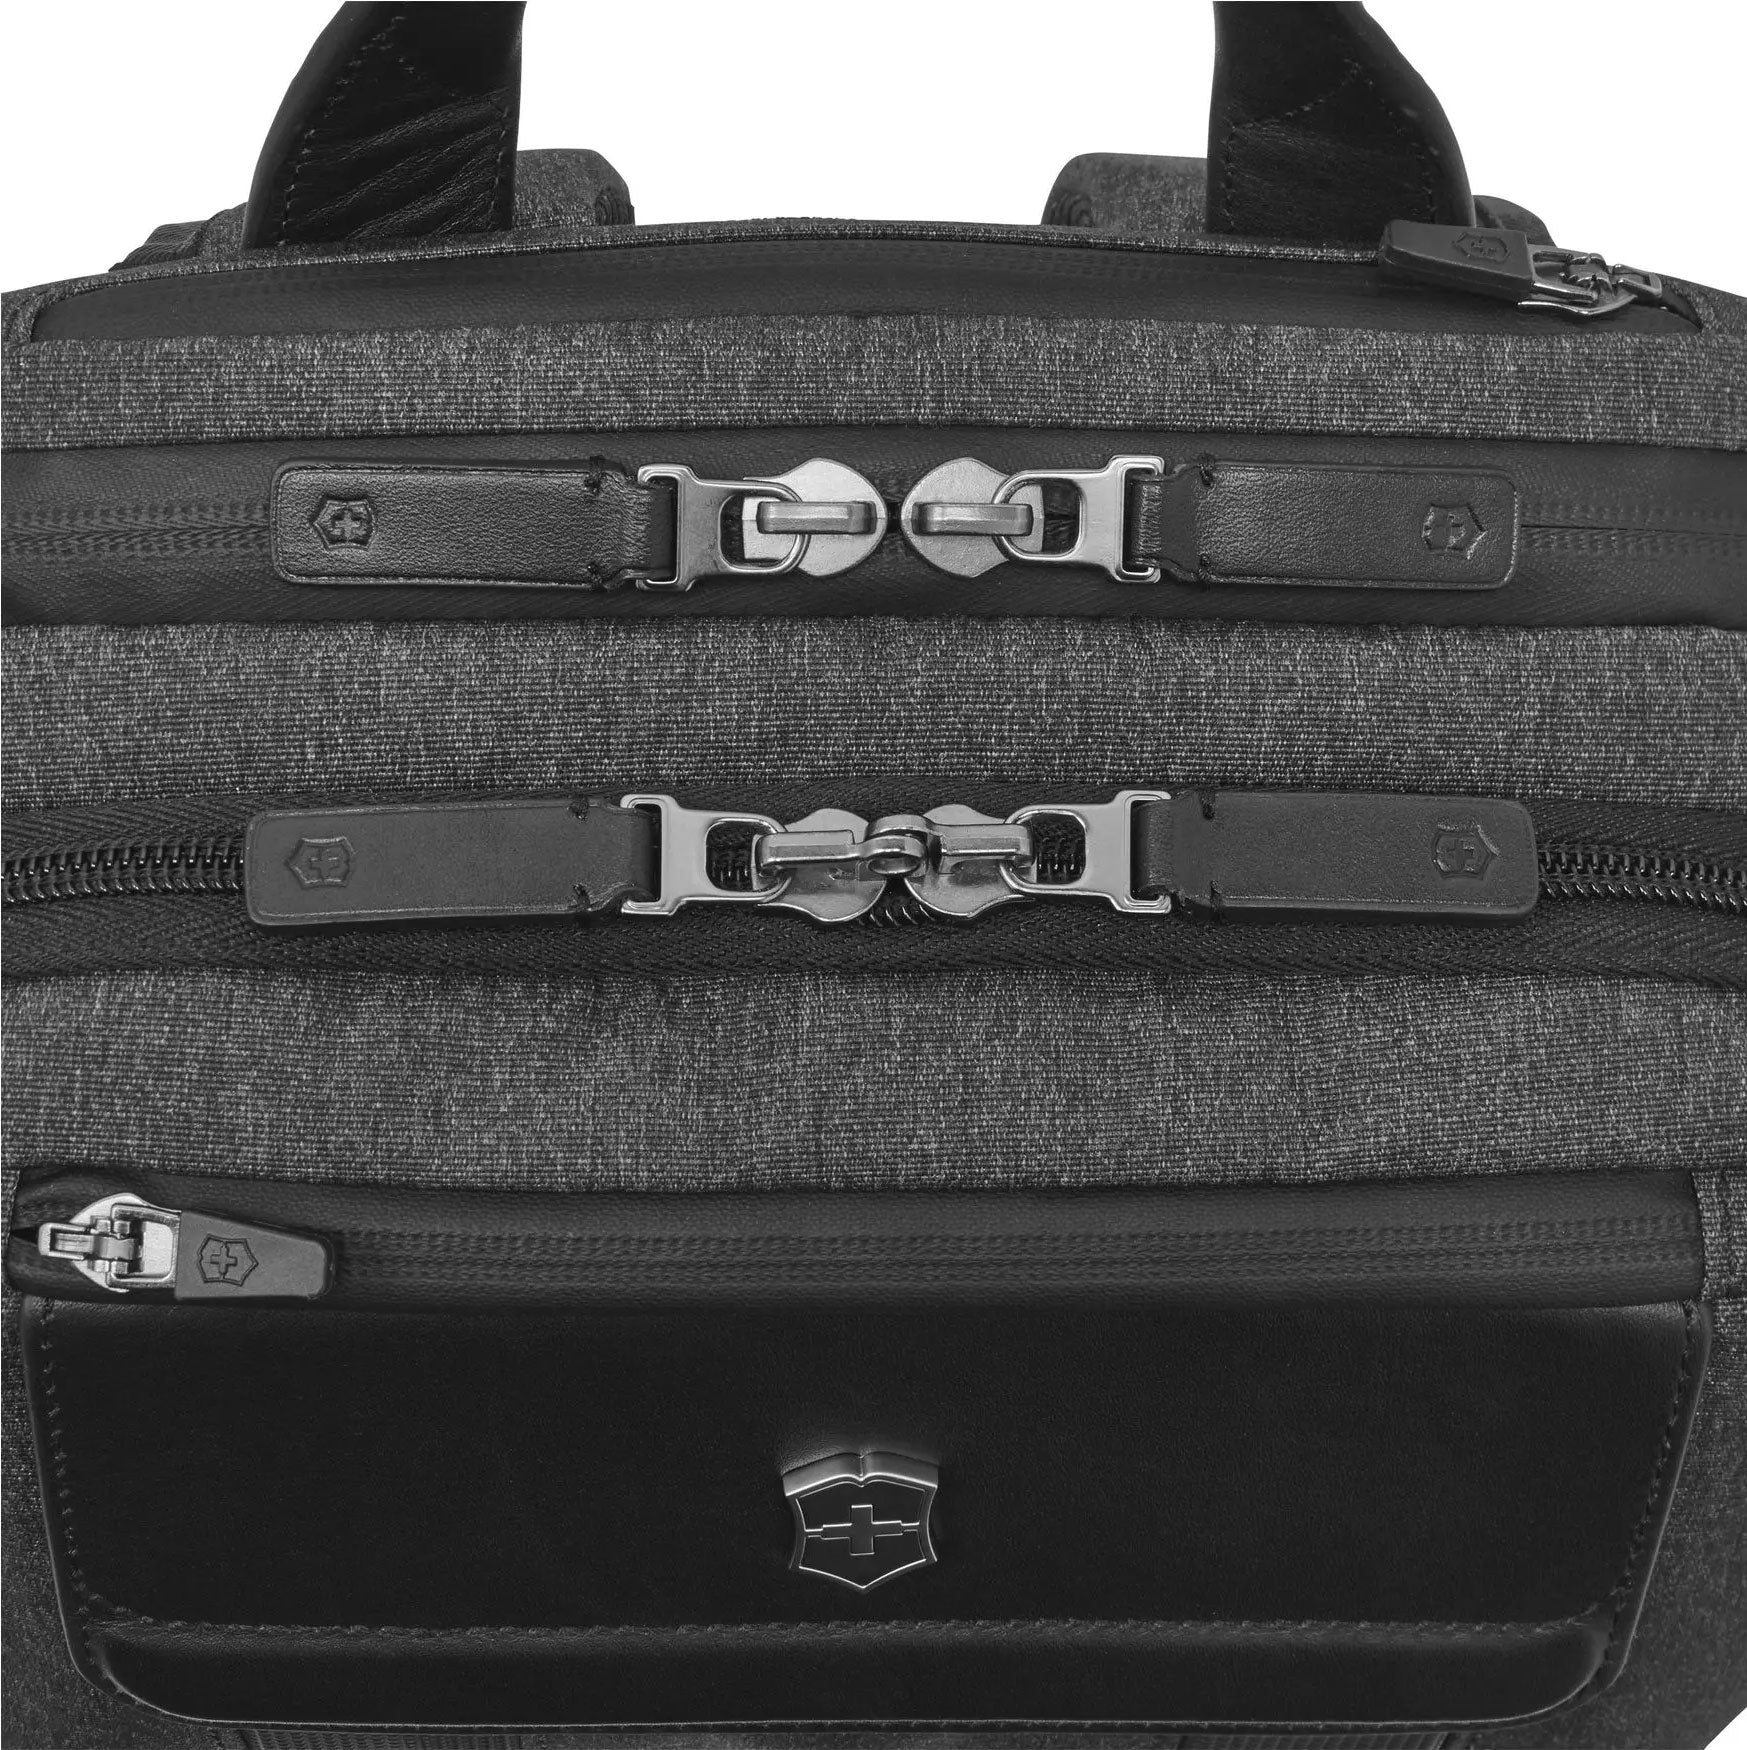 Victorinox Swiss Army Architecture Urban2 Deluxe Backpack